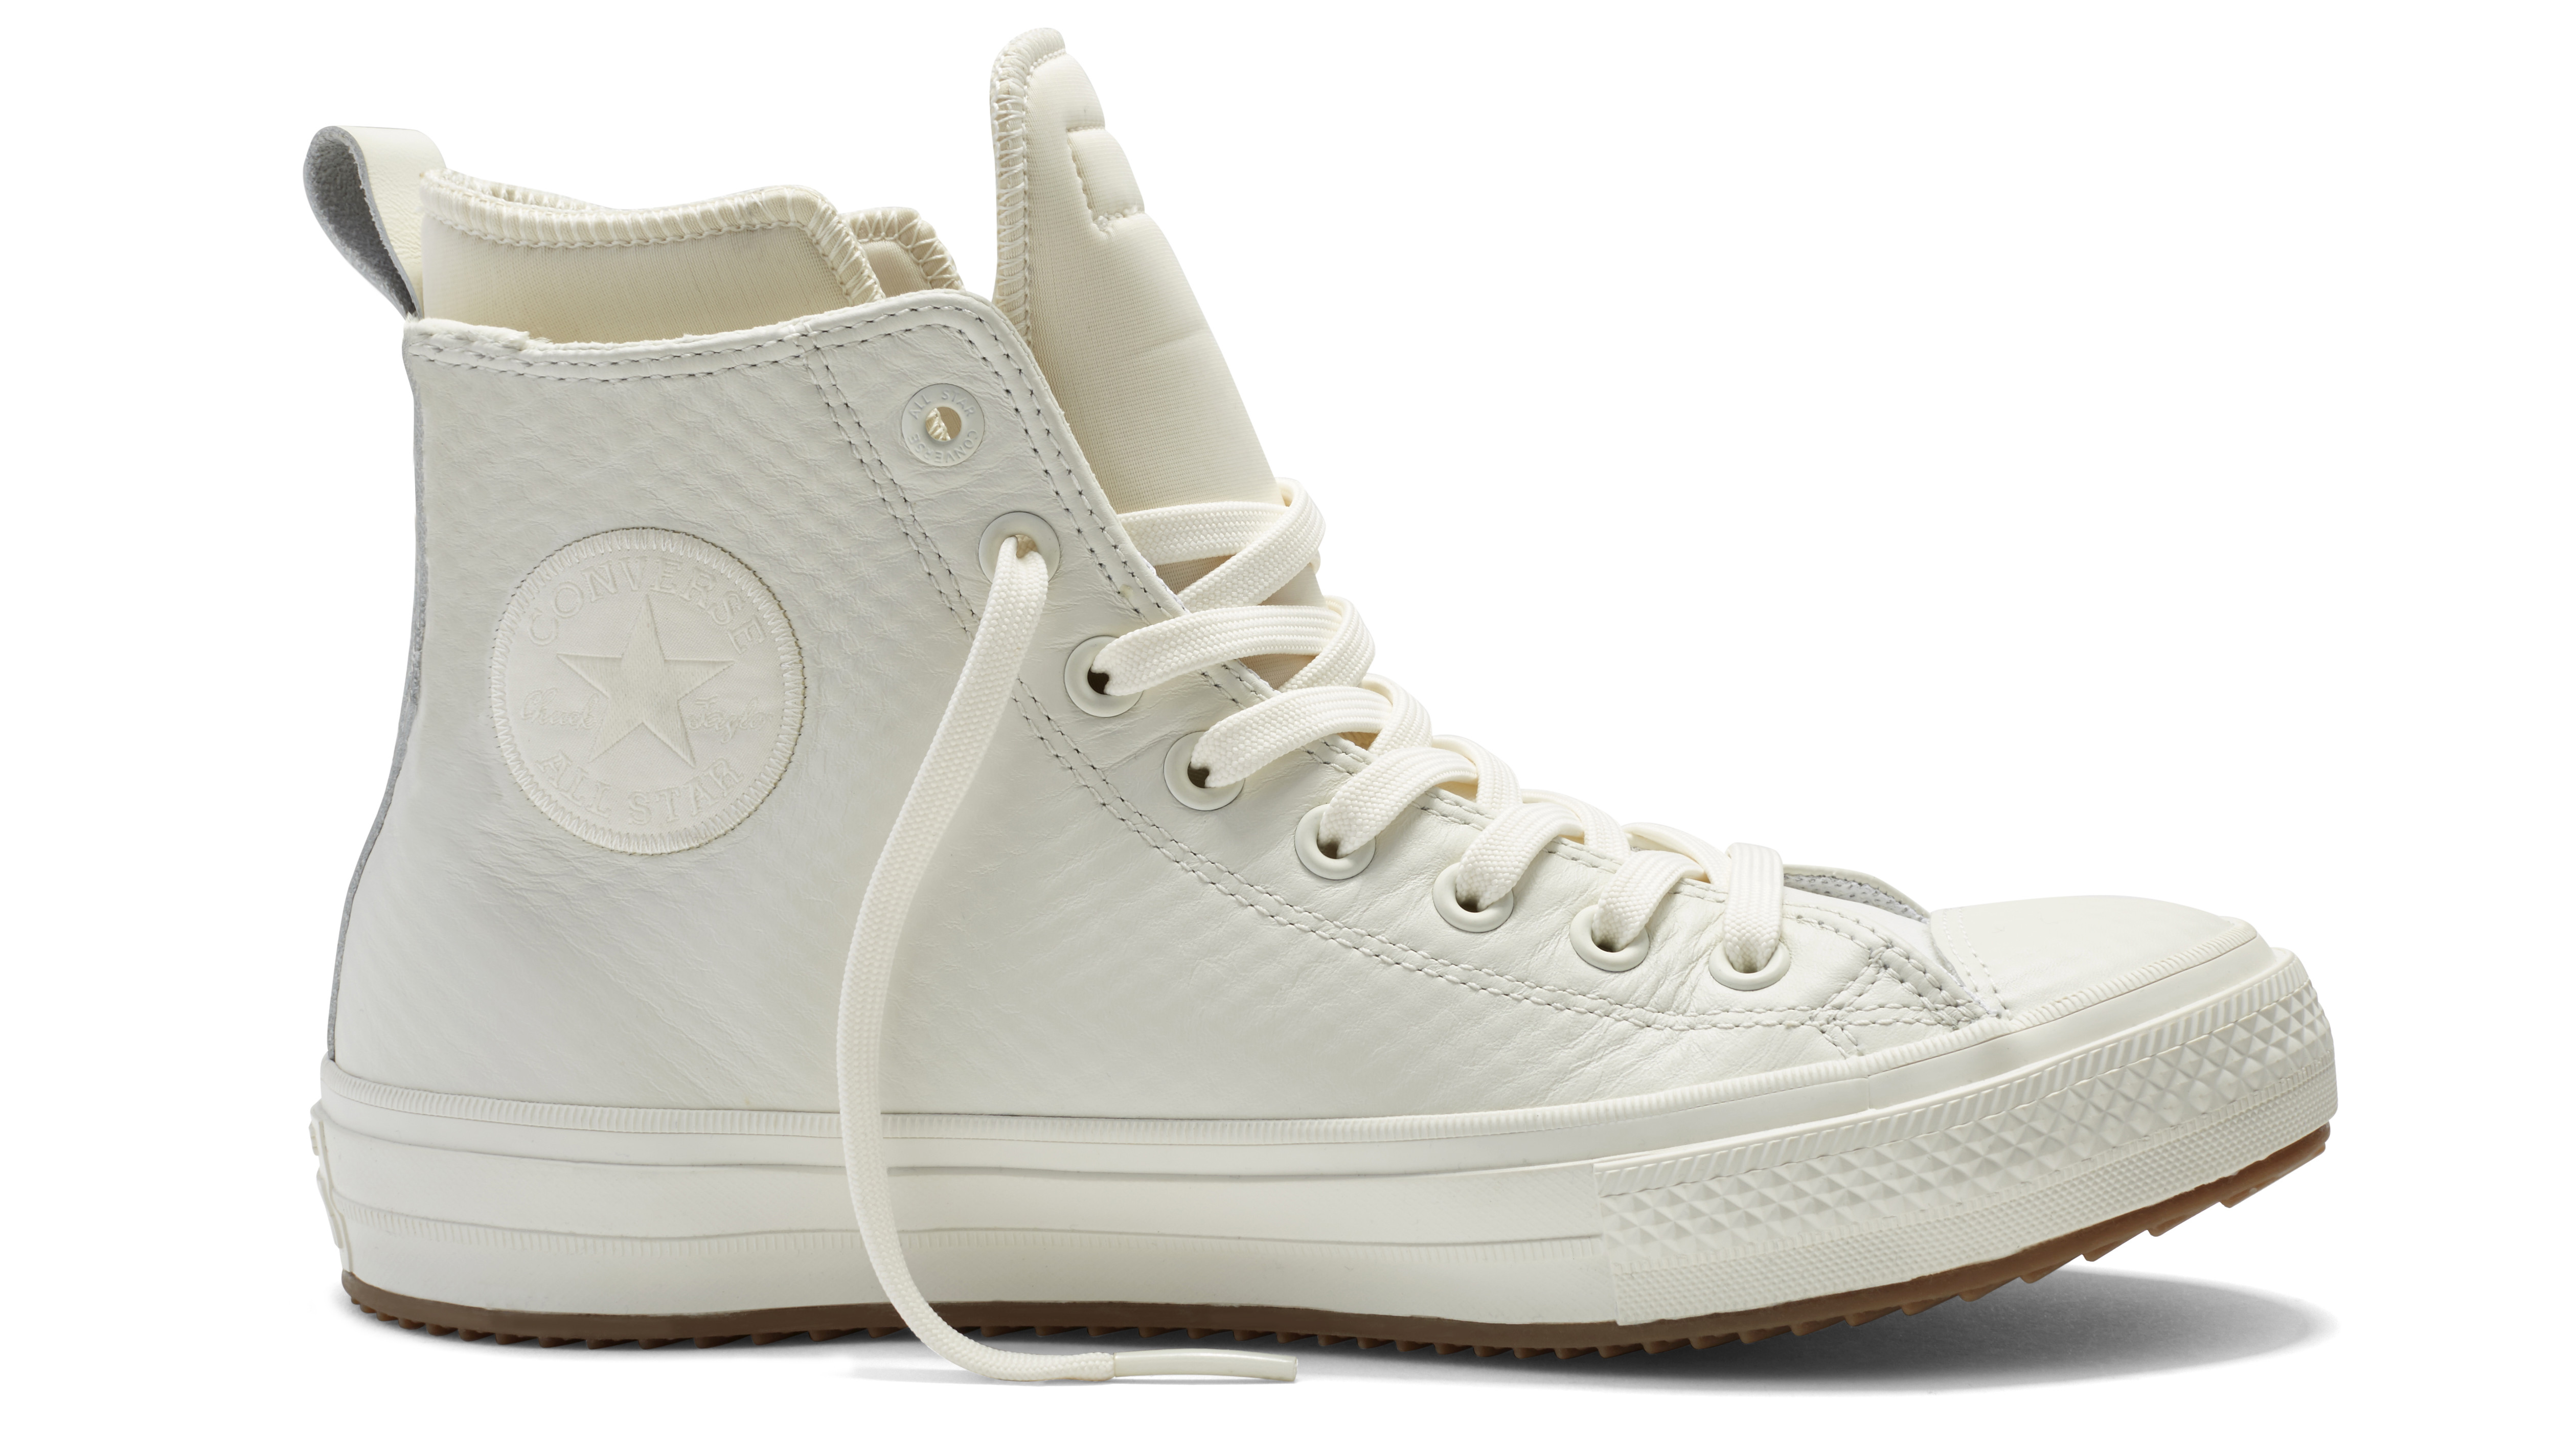 Converse Chuck Taylor All Star 2 Boot White